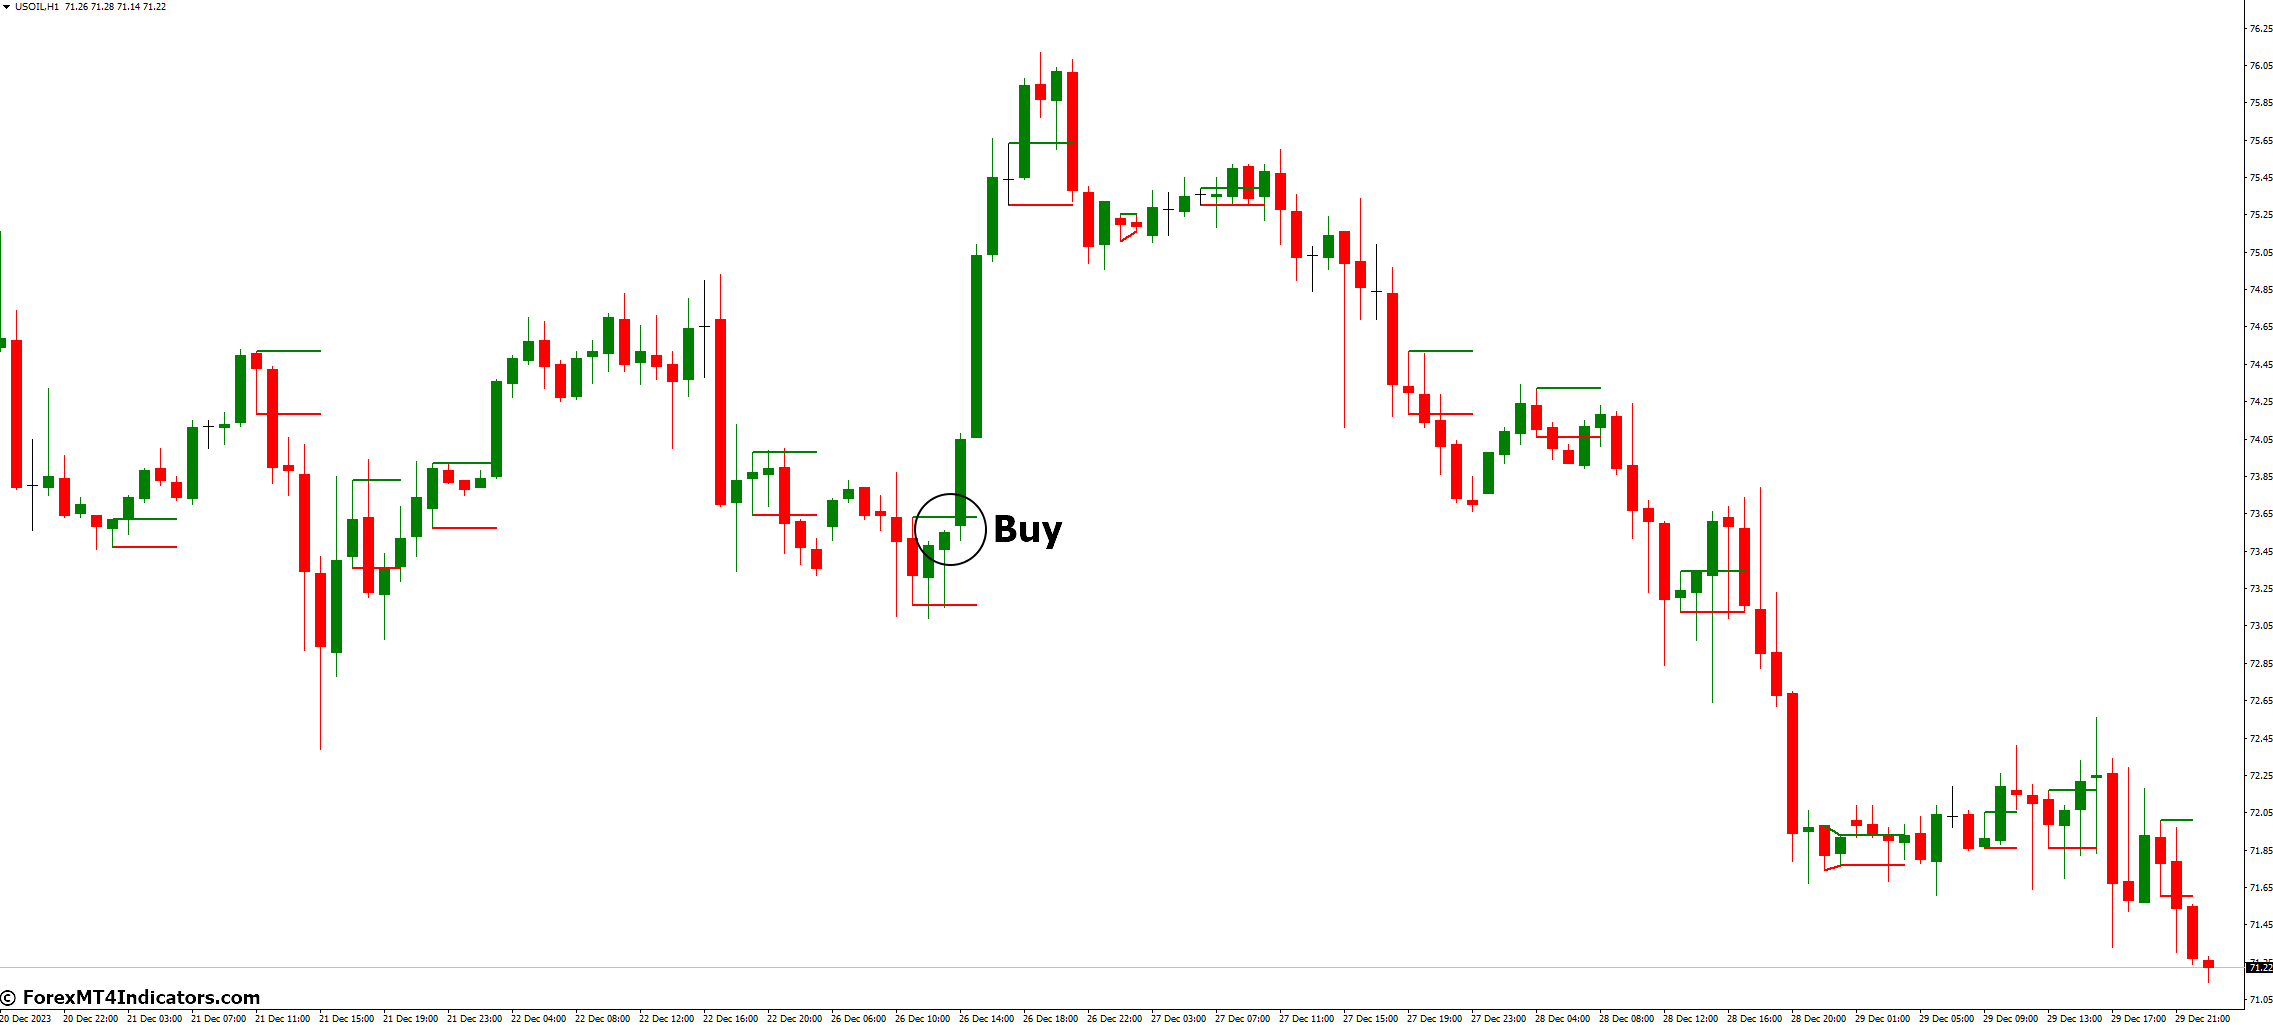 How to Trade with Inside Bars Indicator MetaTrader 4 - Buy Entry